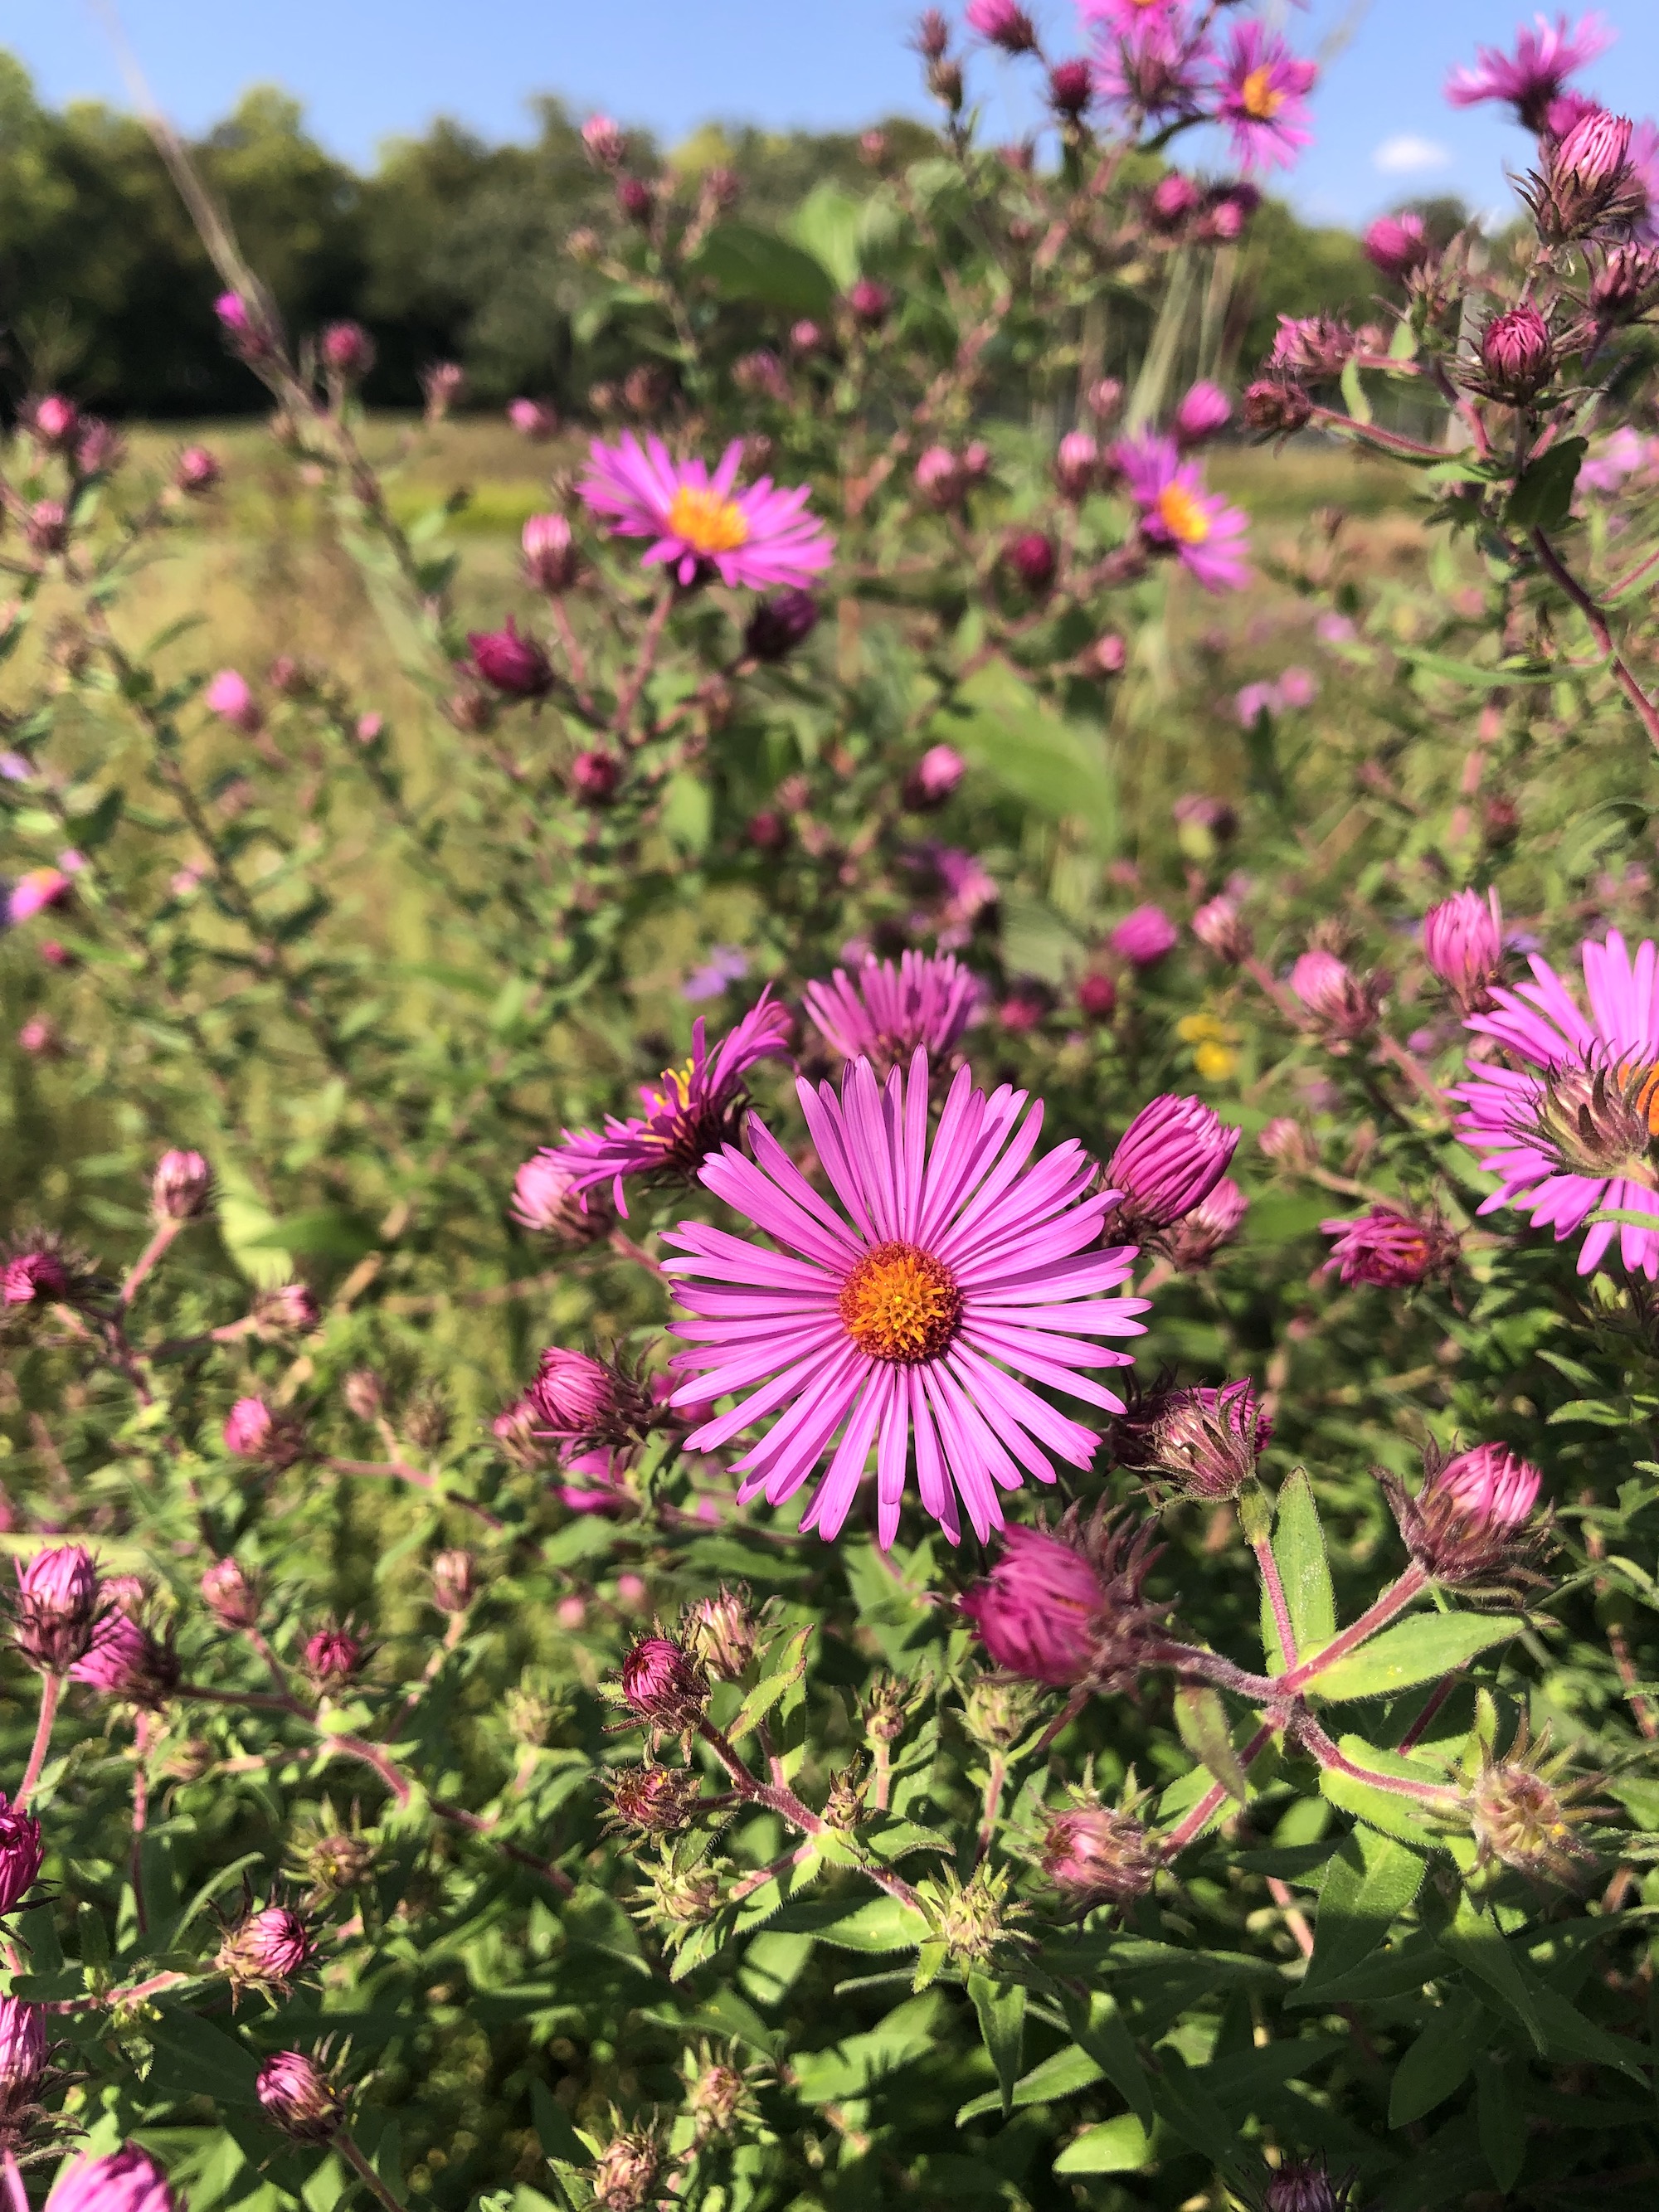 New England Aster on  shore of Vilas Park Lagoon in Madison, Wisconsin on September 19, 2021.